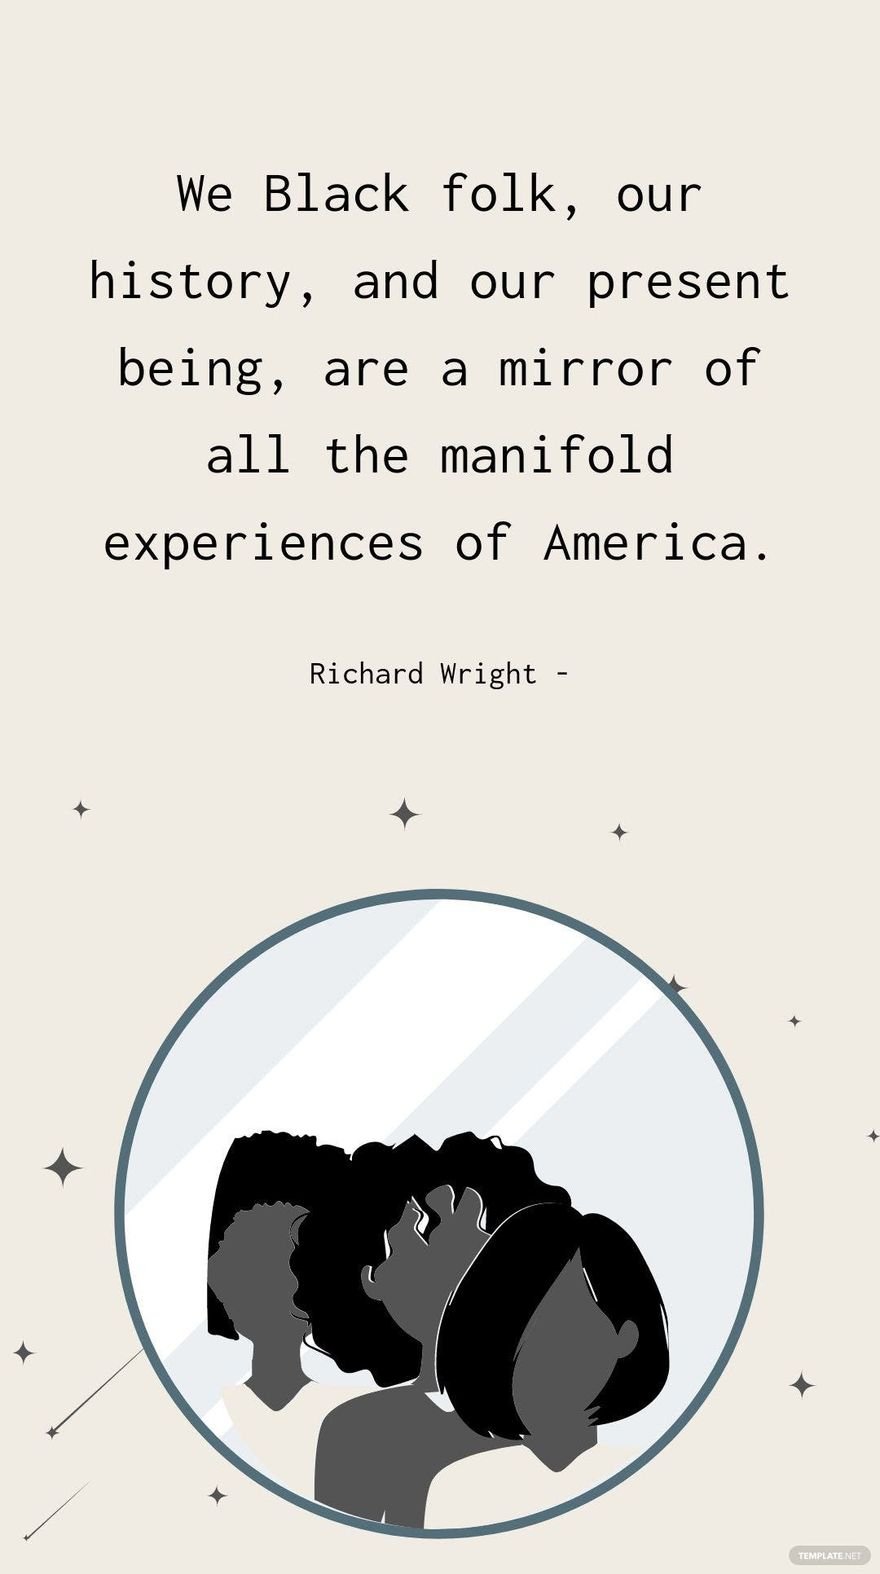 Richard Wright - We Black folk, our history, and our present being, are a mirror of all the manifold experiences of America.